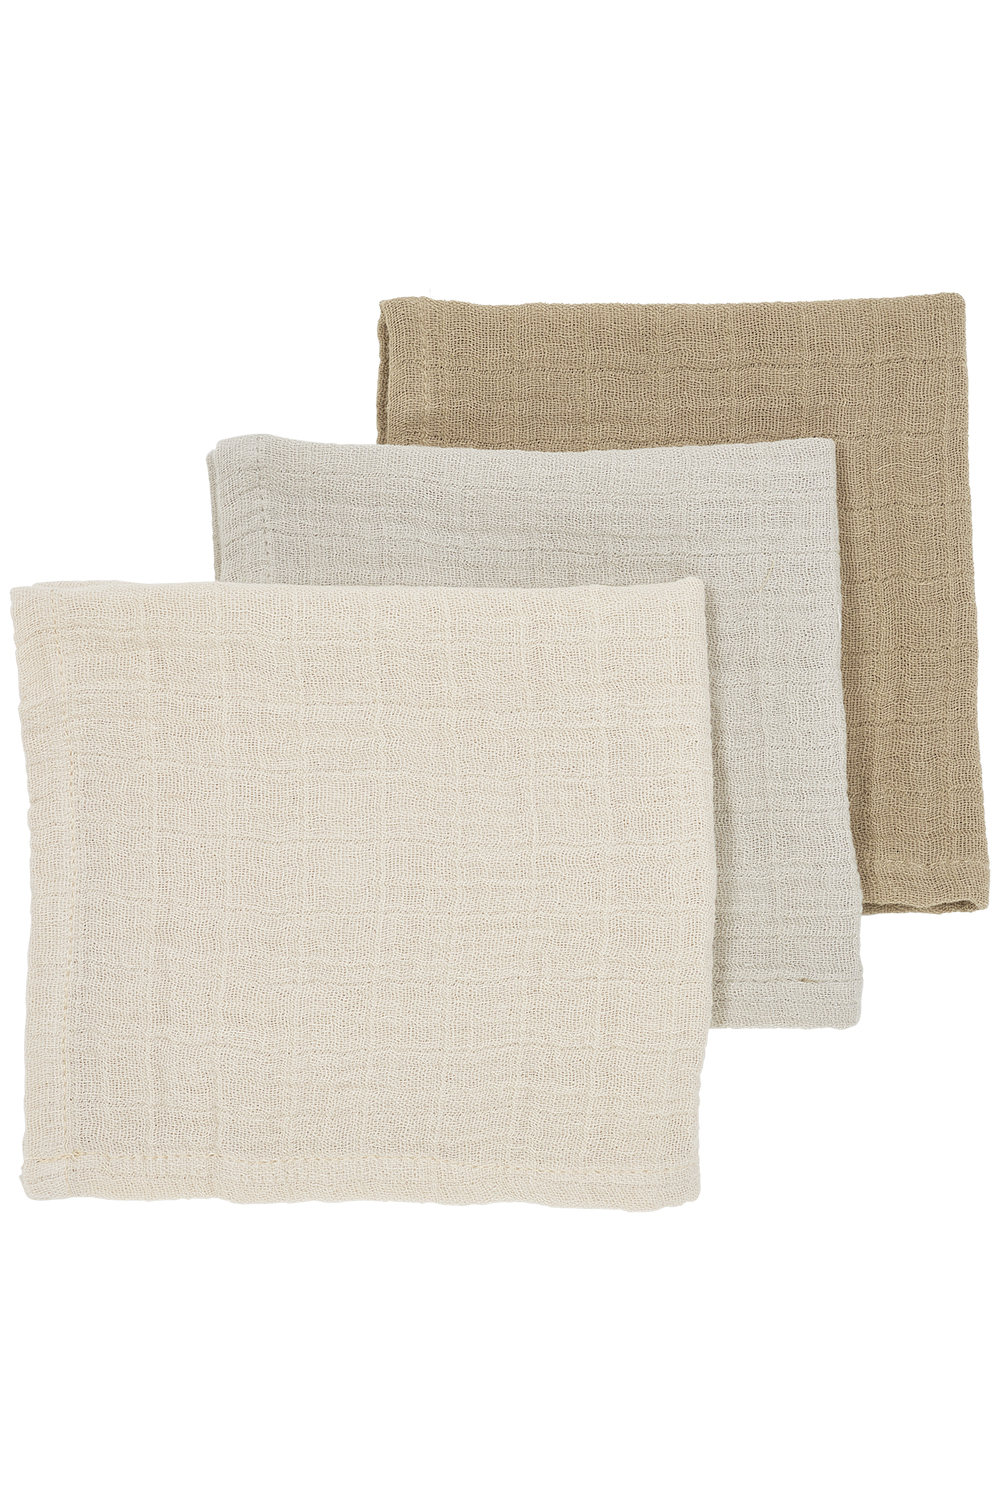 Facecloth 3-pack pre-washed muslin Uni - soft sand/greige/taupe - 30x30cm